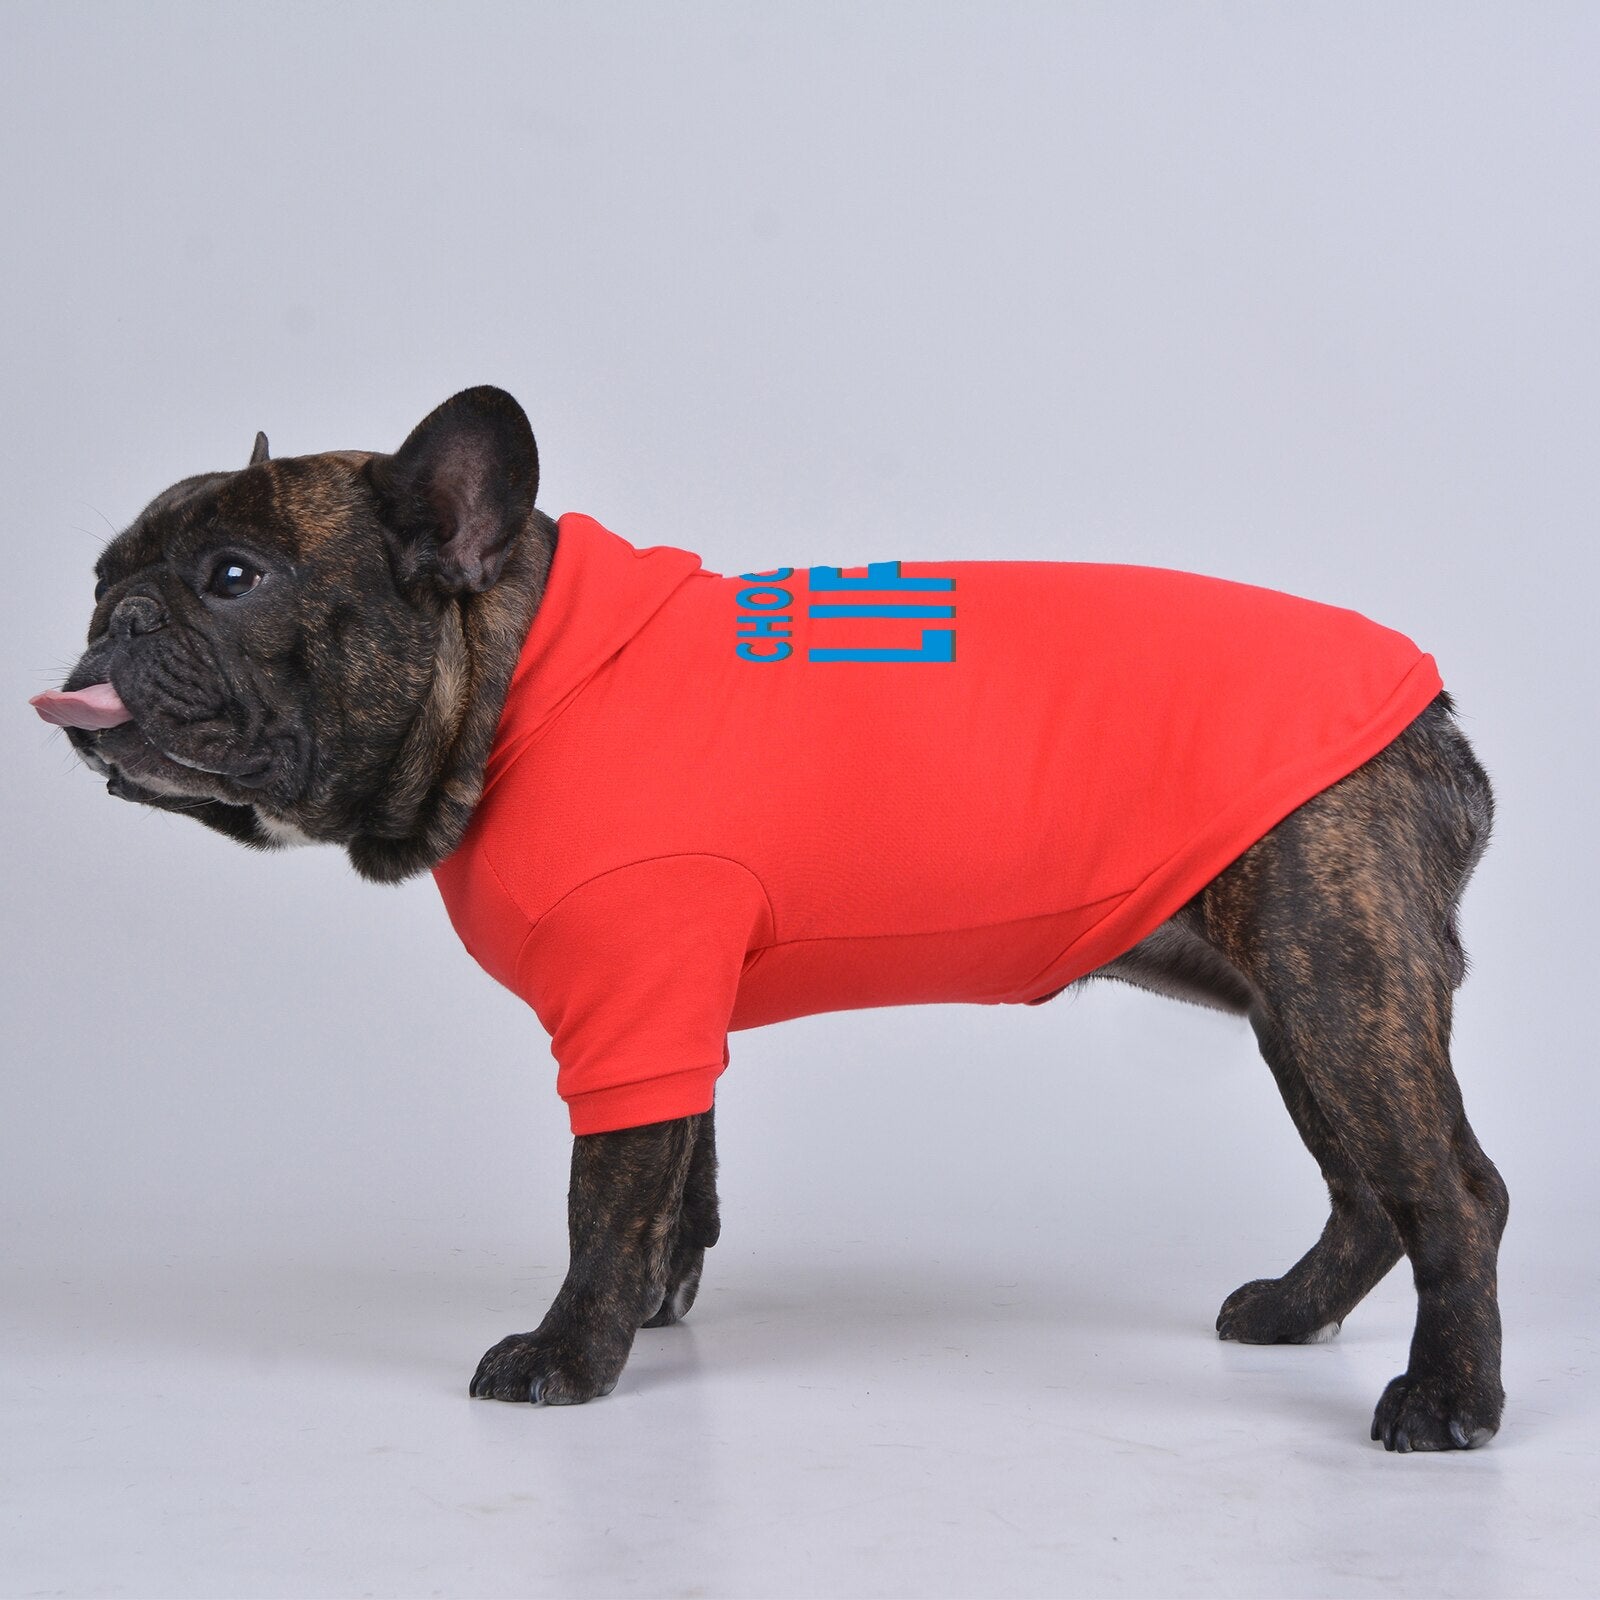 Classic Pet Hoodies for Small Medium Large Big Dogs Cats, Leash Hole Design, Cotton Soft and Comfortable Fabric